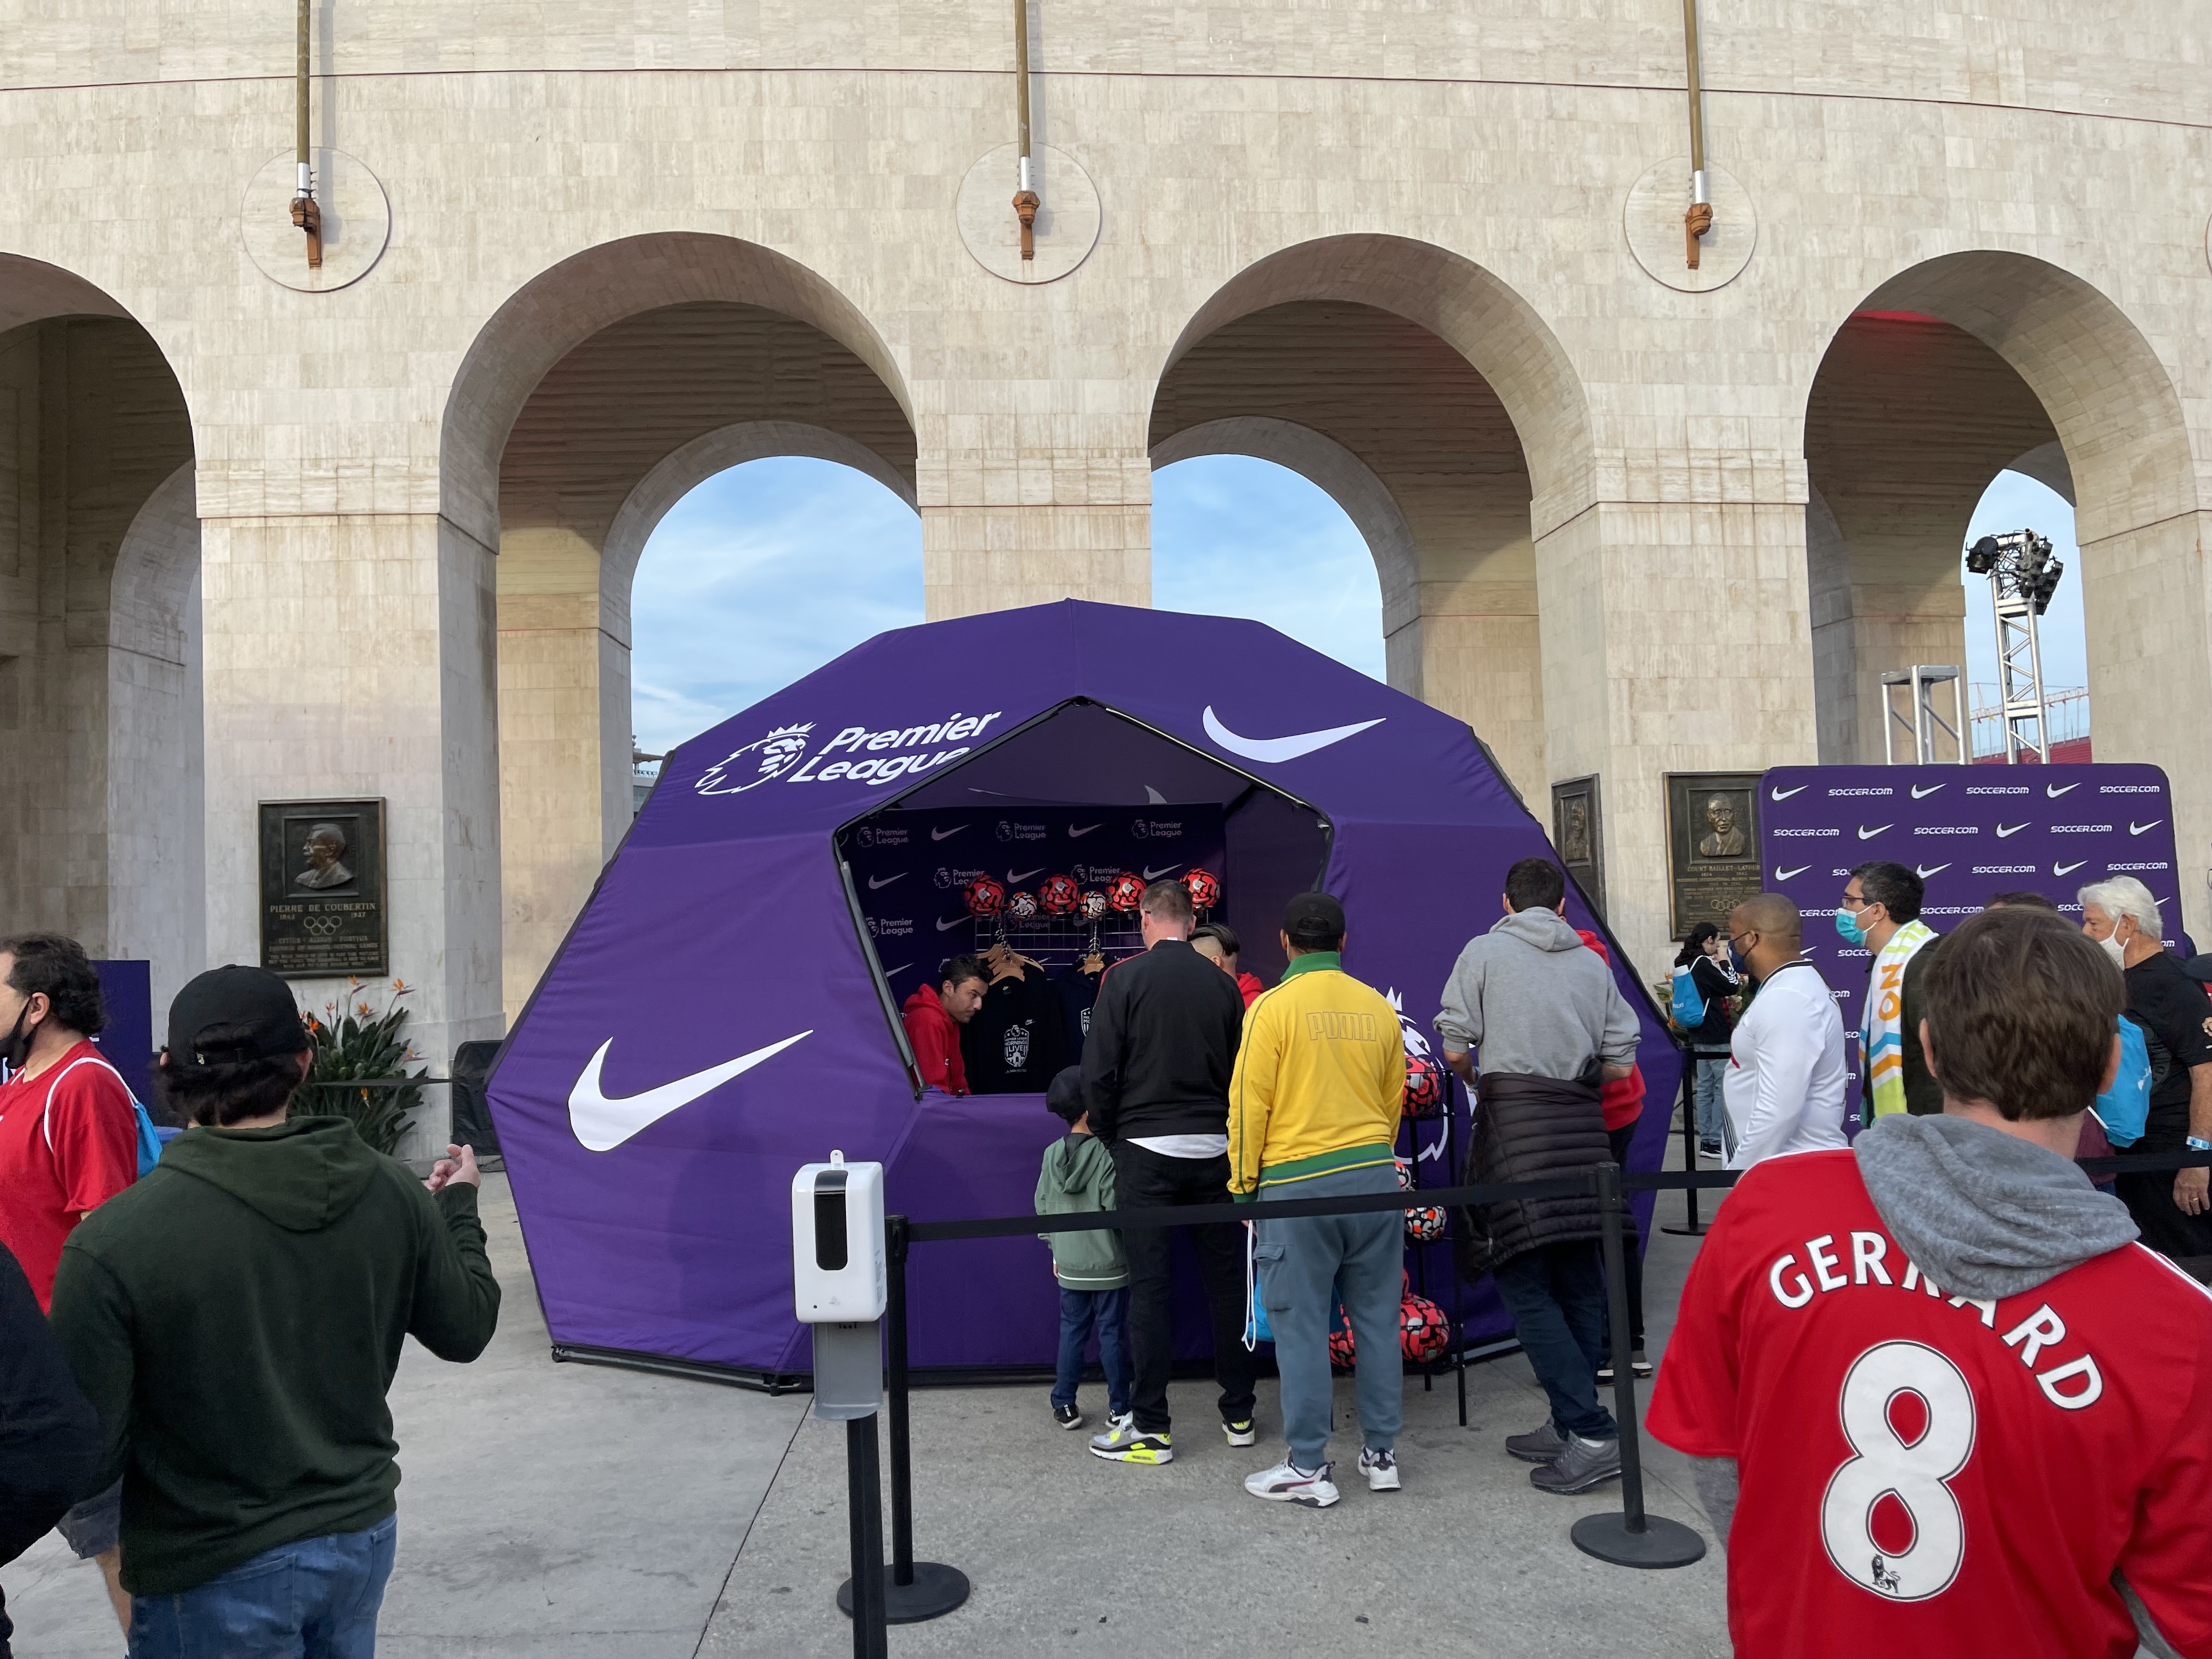 How Soccer.com Used an Event Dome for a Retail Experience